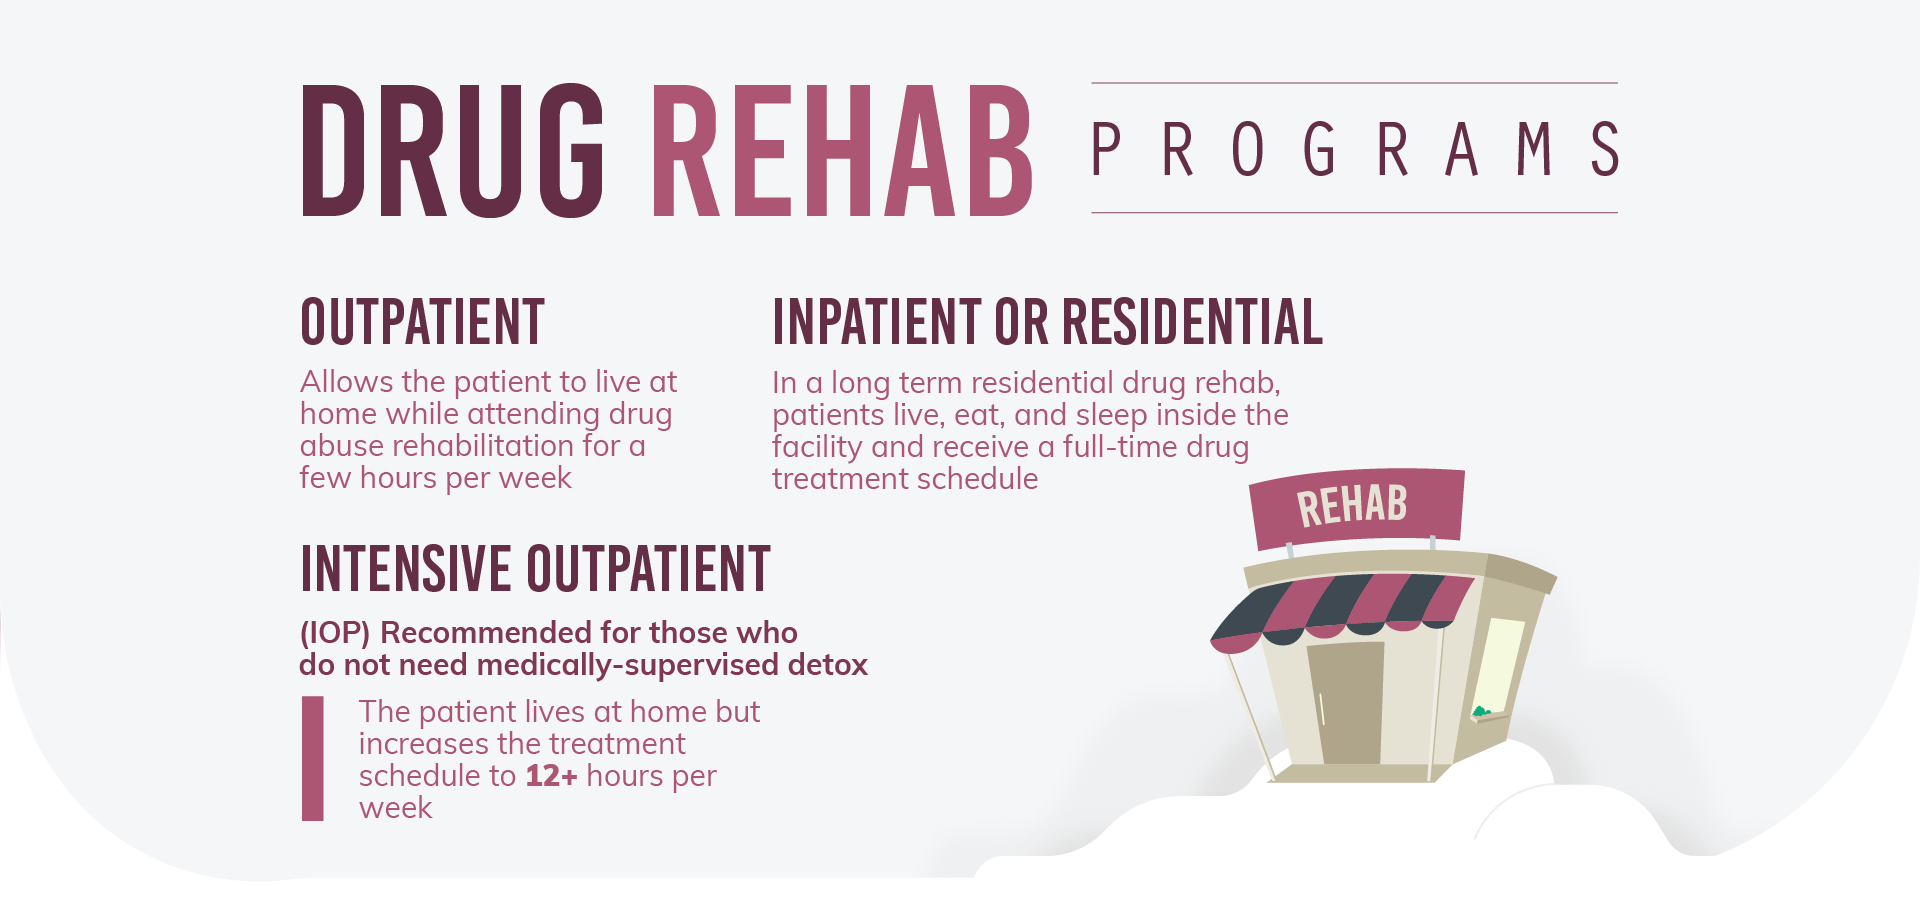 We have many types of drug rehab programs, we have one called "outpatient" which allows the patient to live at home while attending drug abuse rehabilitation for a few hours per week, we also have a program called "inpatient or residential" in which you are in a long term residential drug rehab as a patient, you live,eat and sleep inside the facility and receive a full-time drug treatment schedule, and we have another called "intensive outpatient", this is recommended for those who do not need medically-supervised detox, with this program the patient lives at home but increases the treatment schedule with 12 extra hours per week.